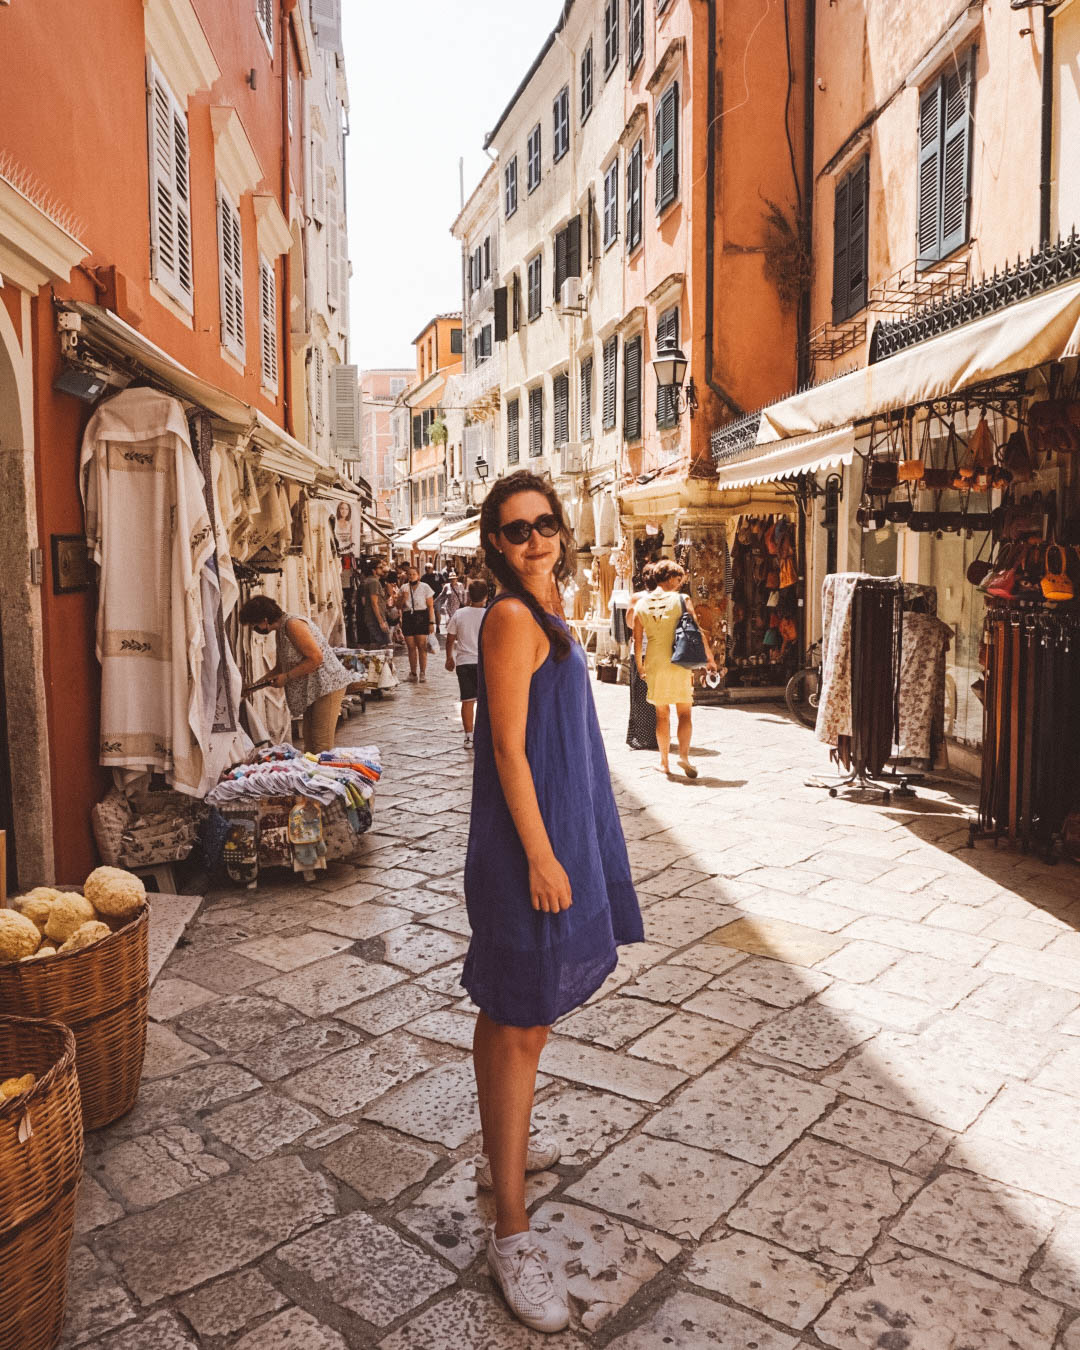 Woman in blue dress smiling in Corfu Old Town.